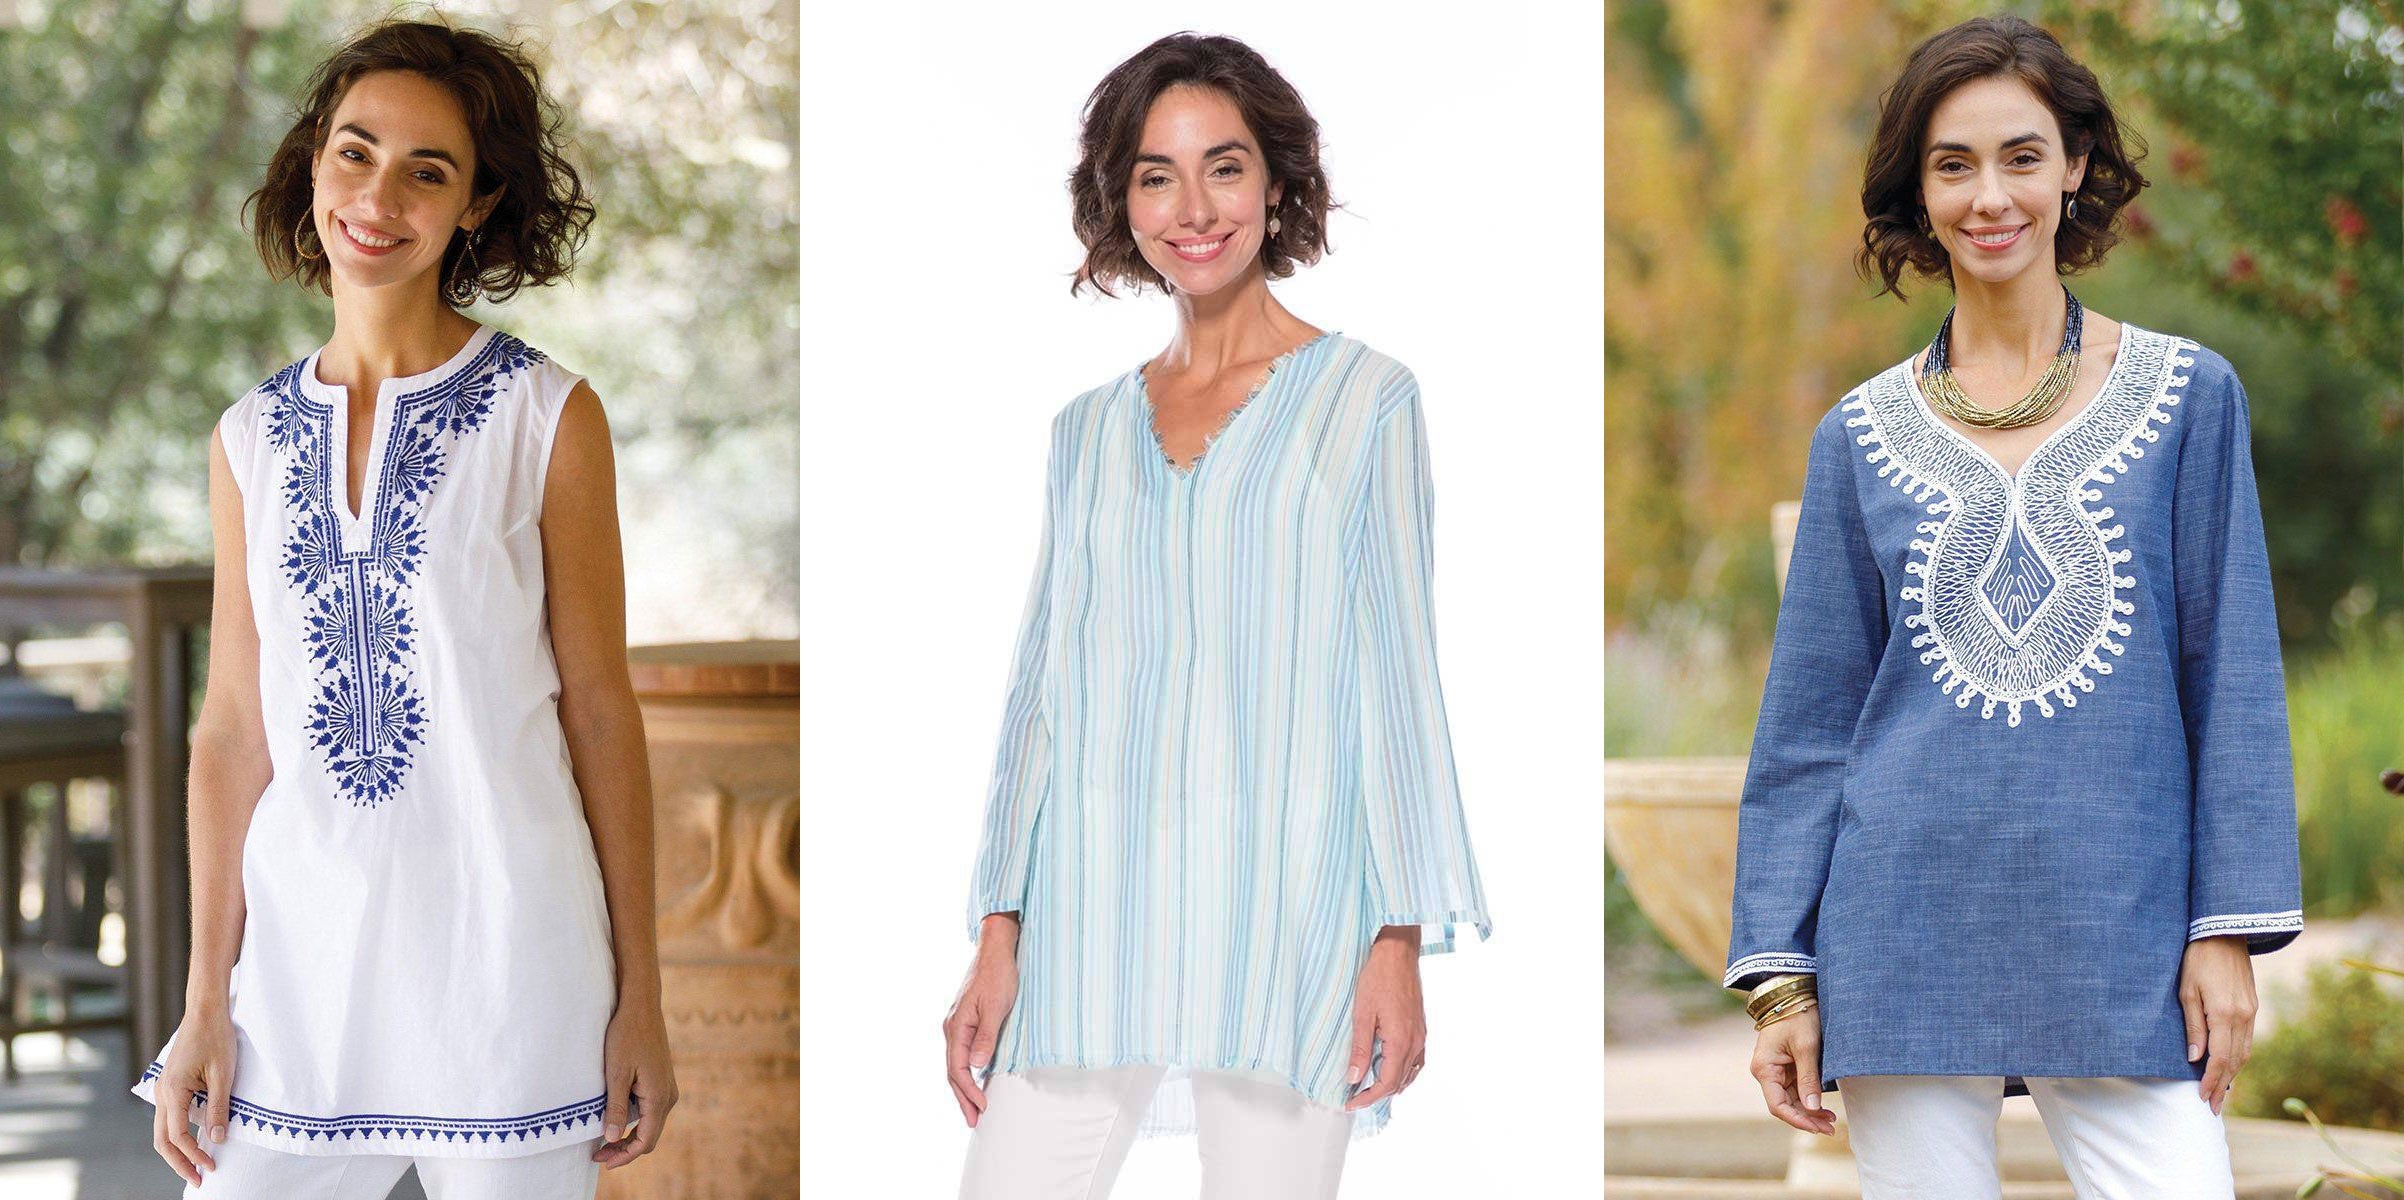 3 blue and white tunics for women inspired by the Greek island Hydra